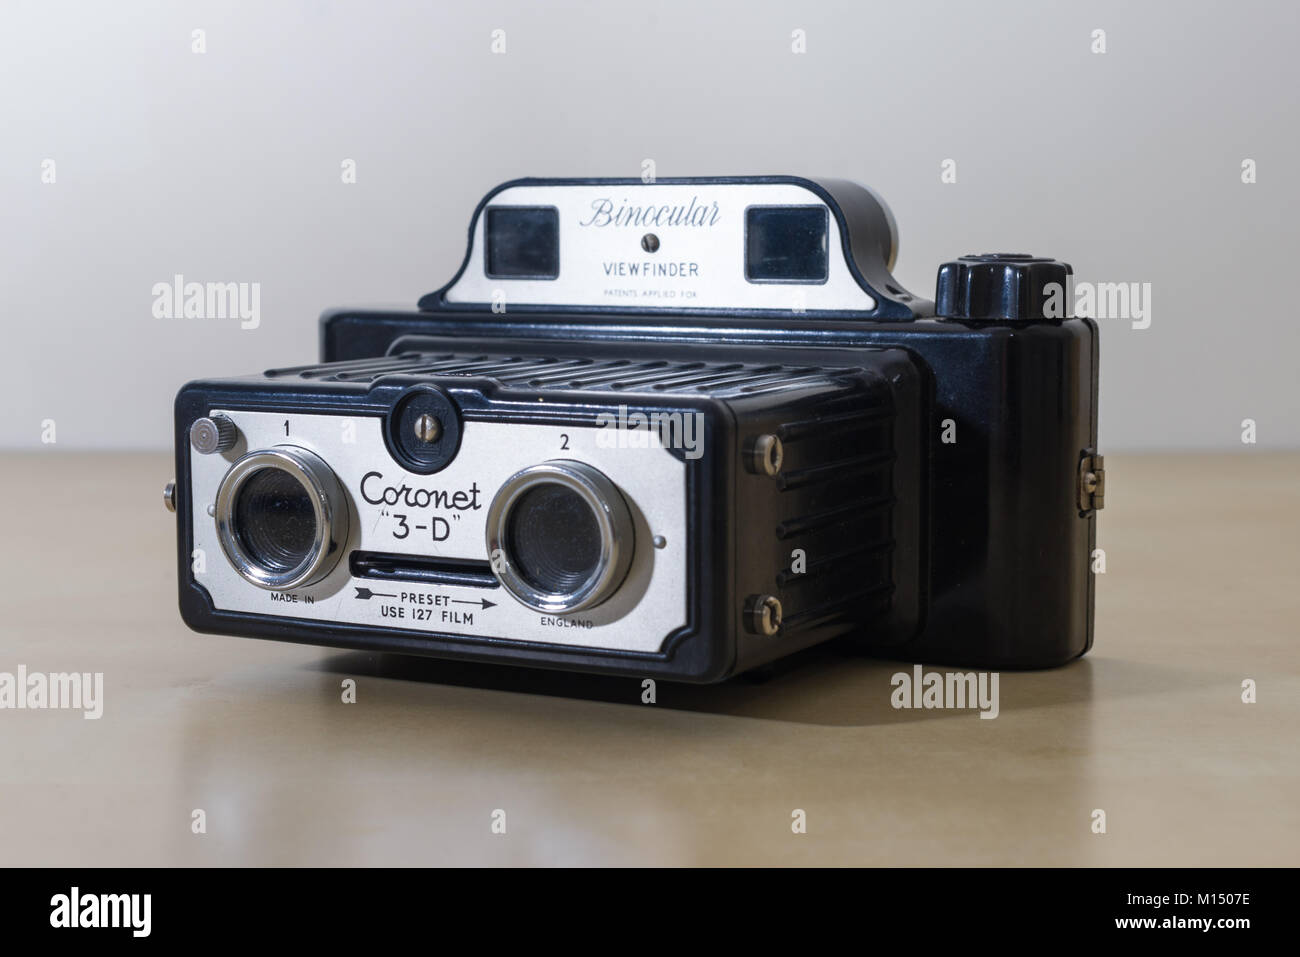 A Coronet 3D Camera binocular version, manufactured by the Coronet Camera Company around 1954, able to take stereoscopic photos on 127 roll film Stock Photo